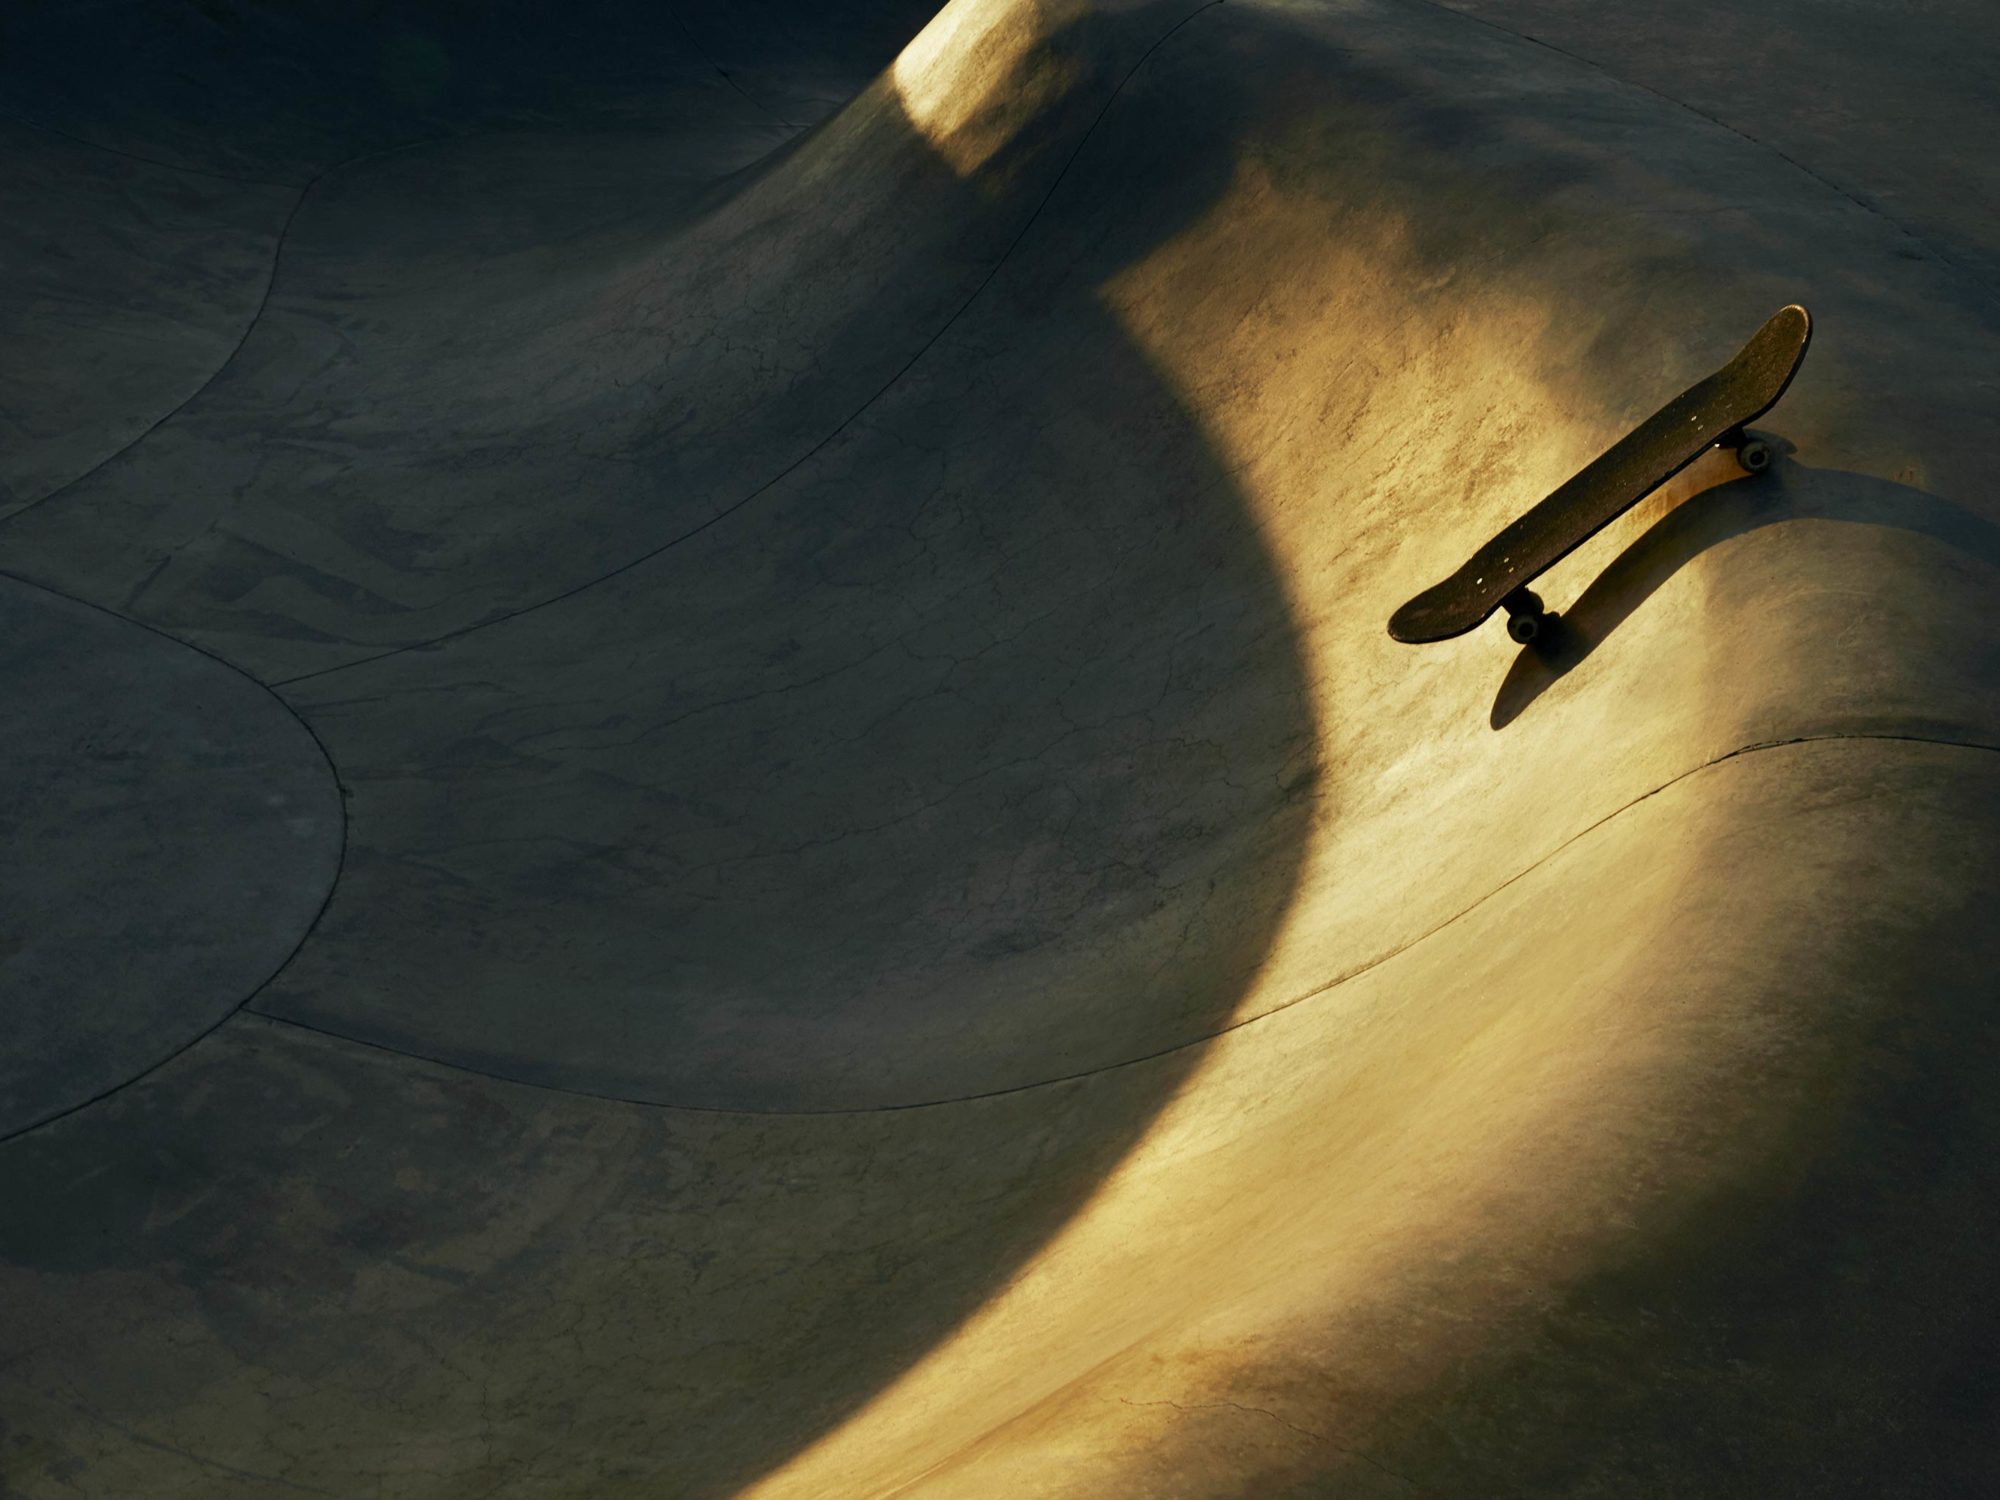 Gravity Fed - Skate Park, Venice Beach Collection - Fine Art Photography by Toby Dixon